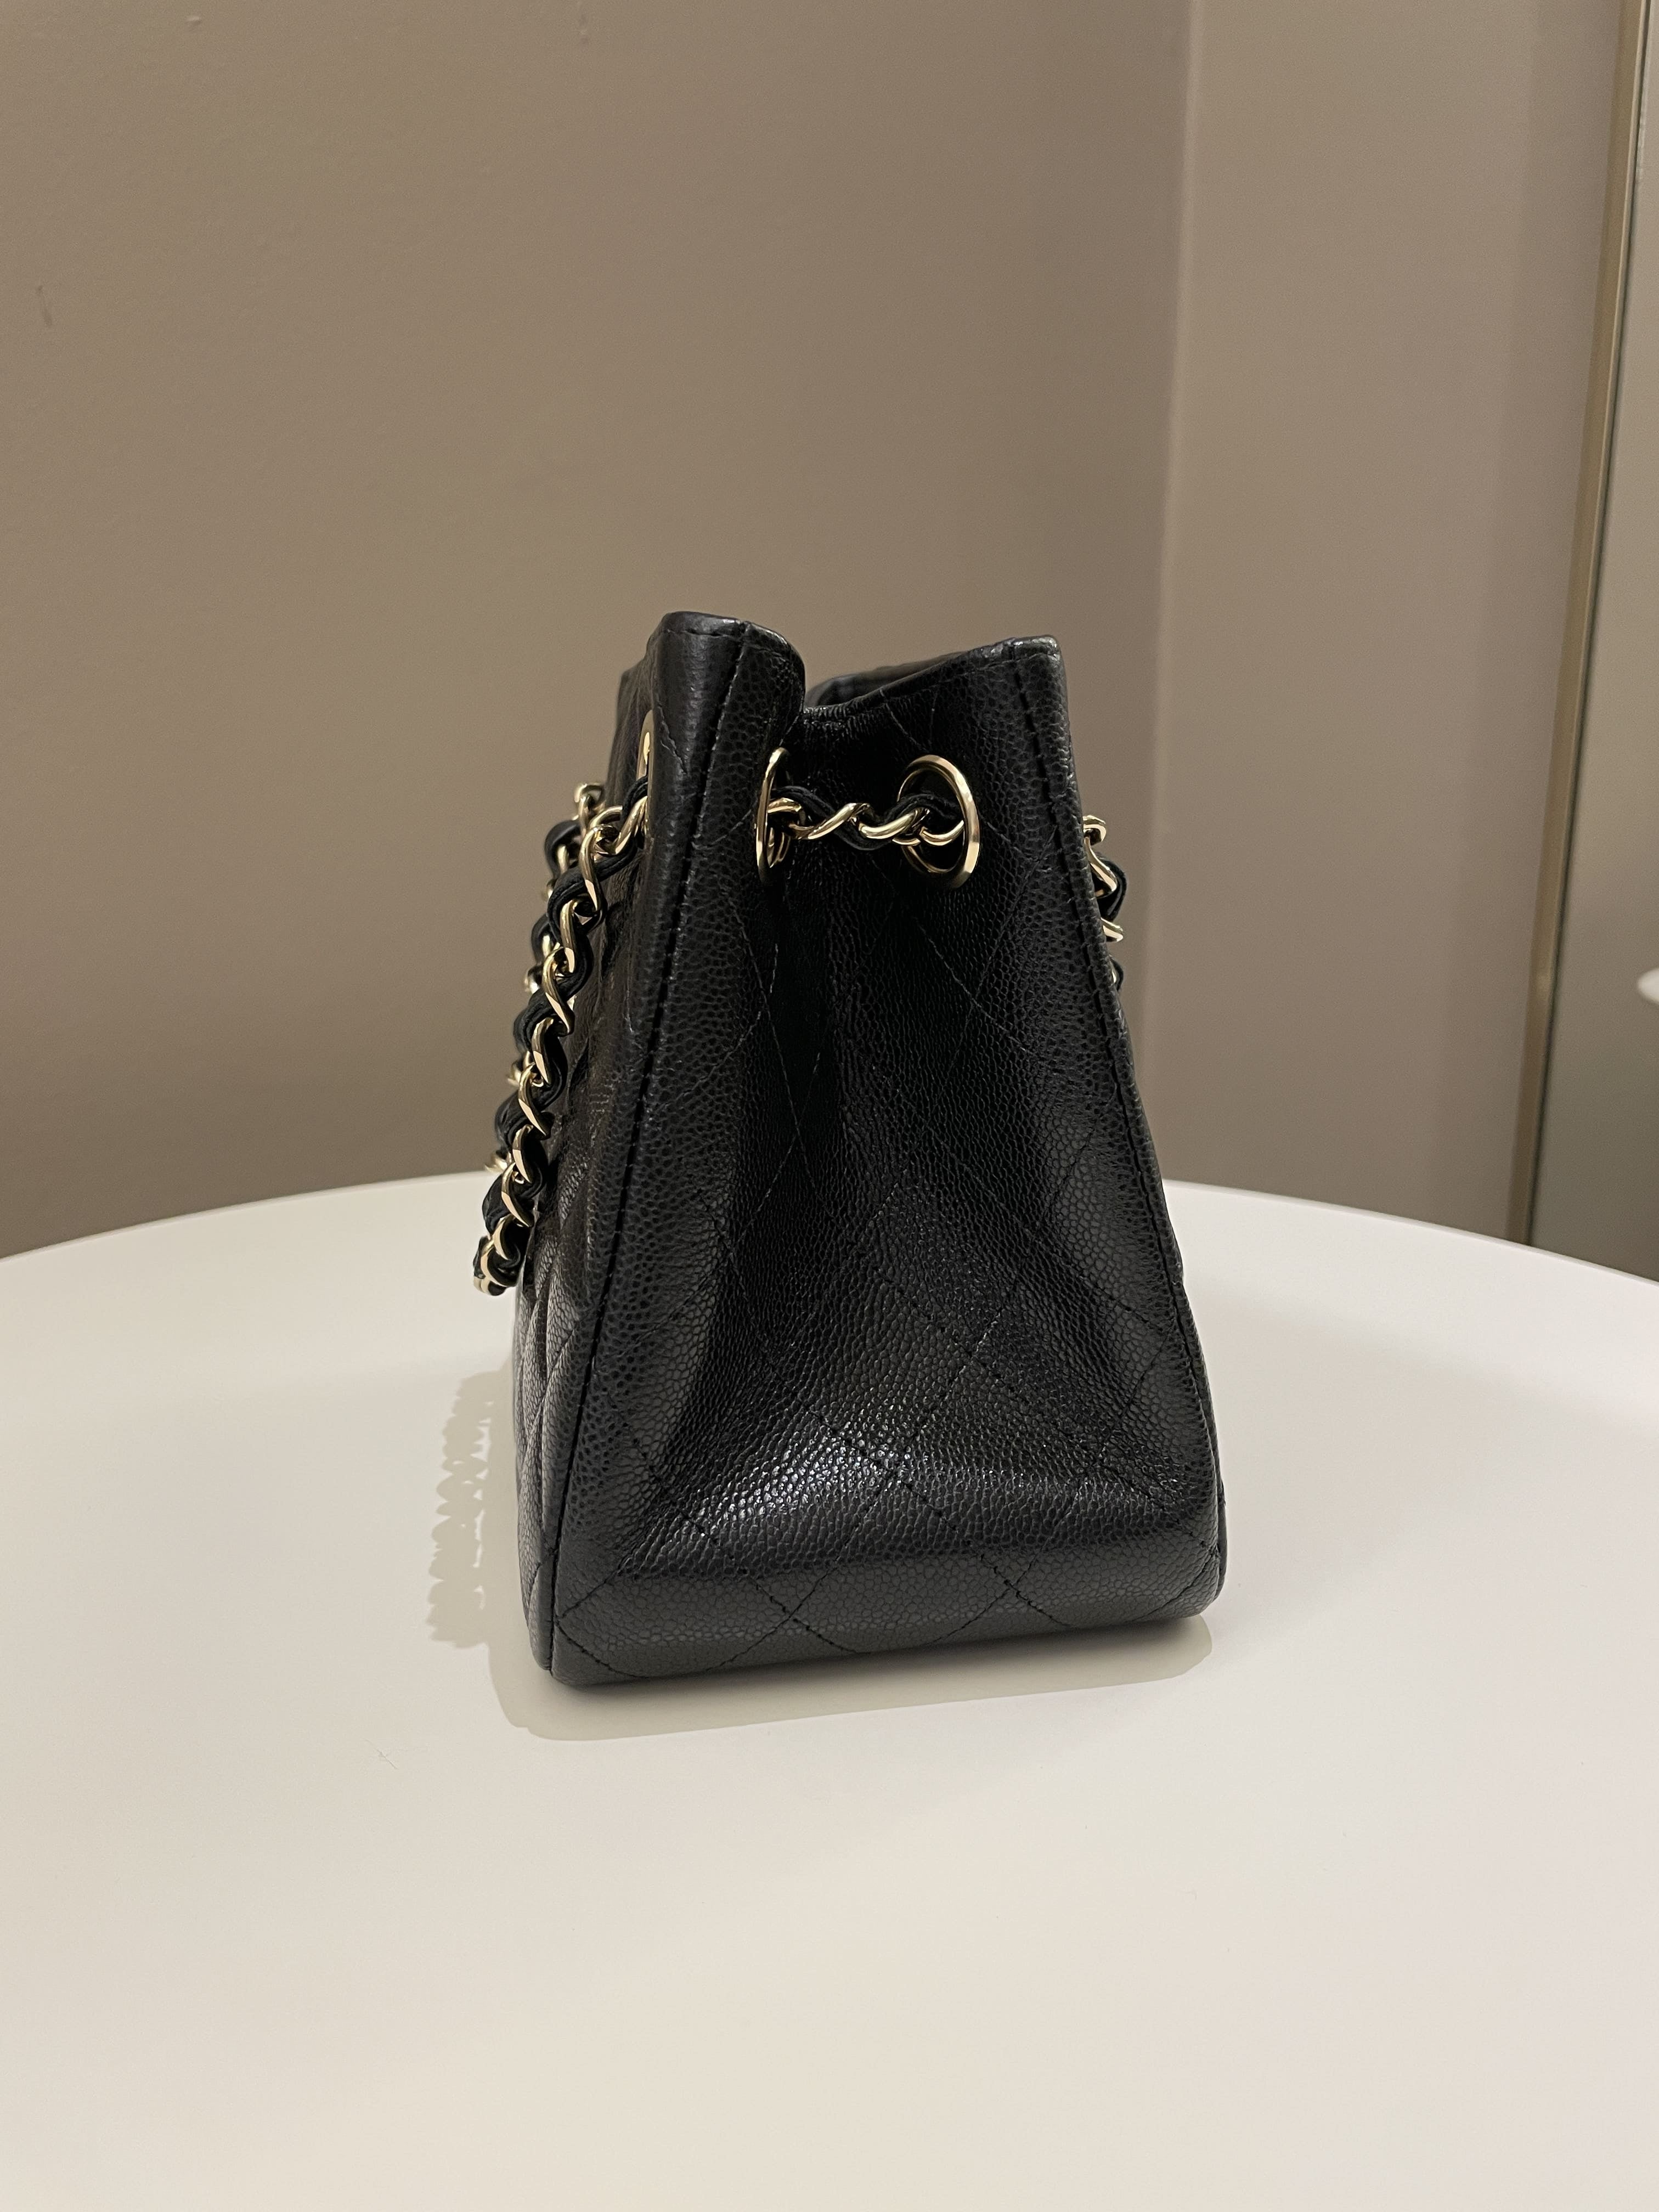 Chanel Quilted Cc Bucket Bag Black Caviar